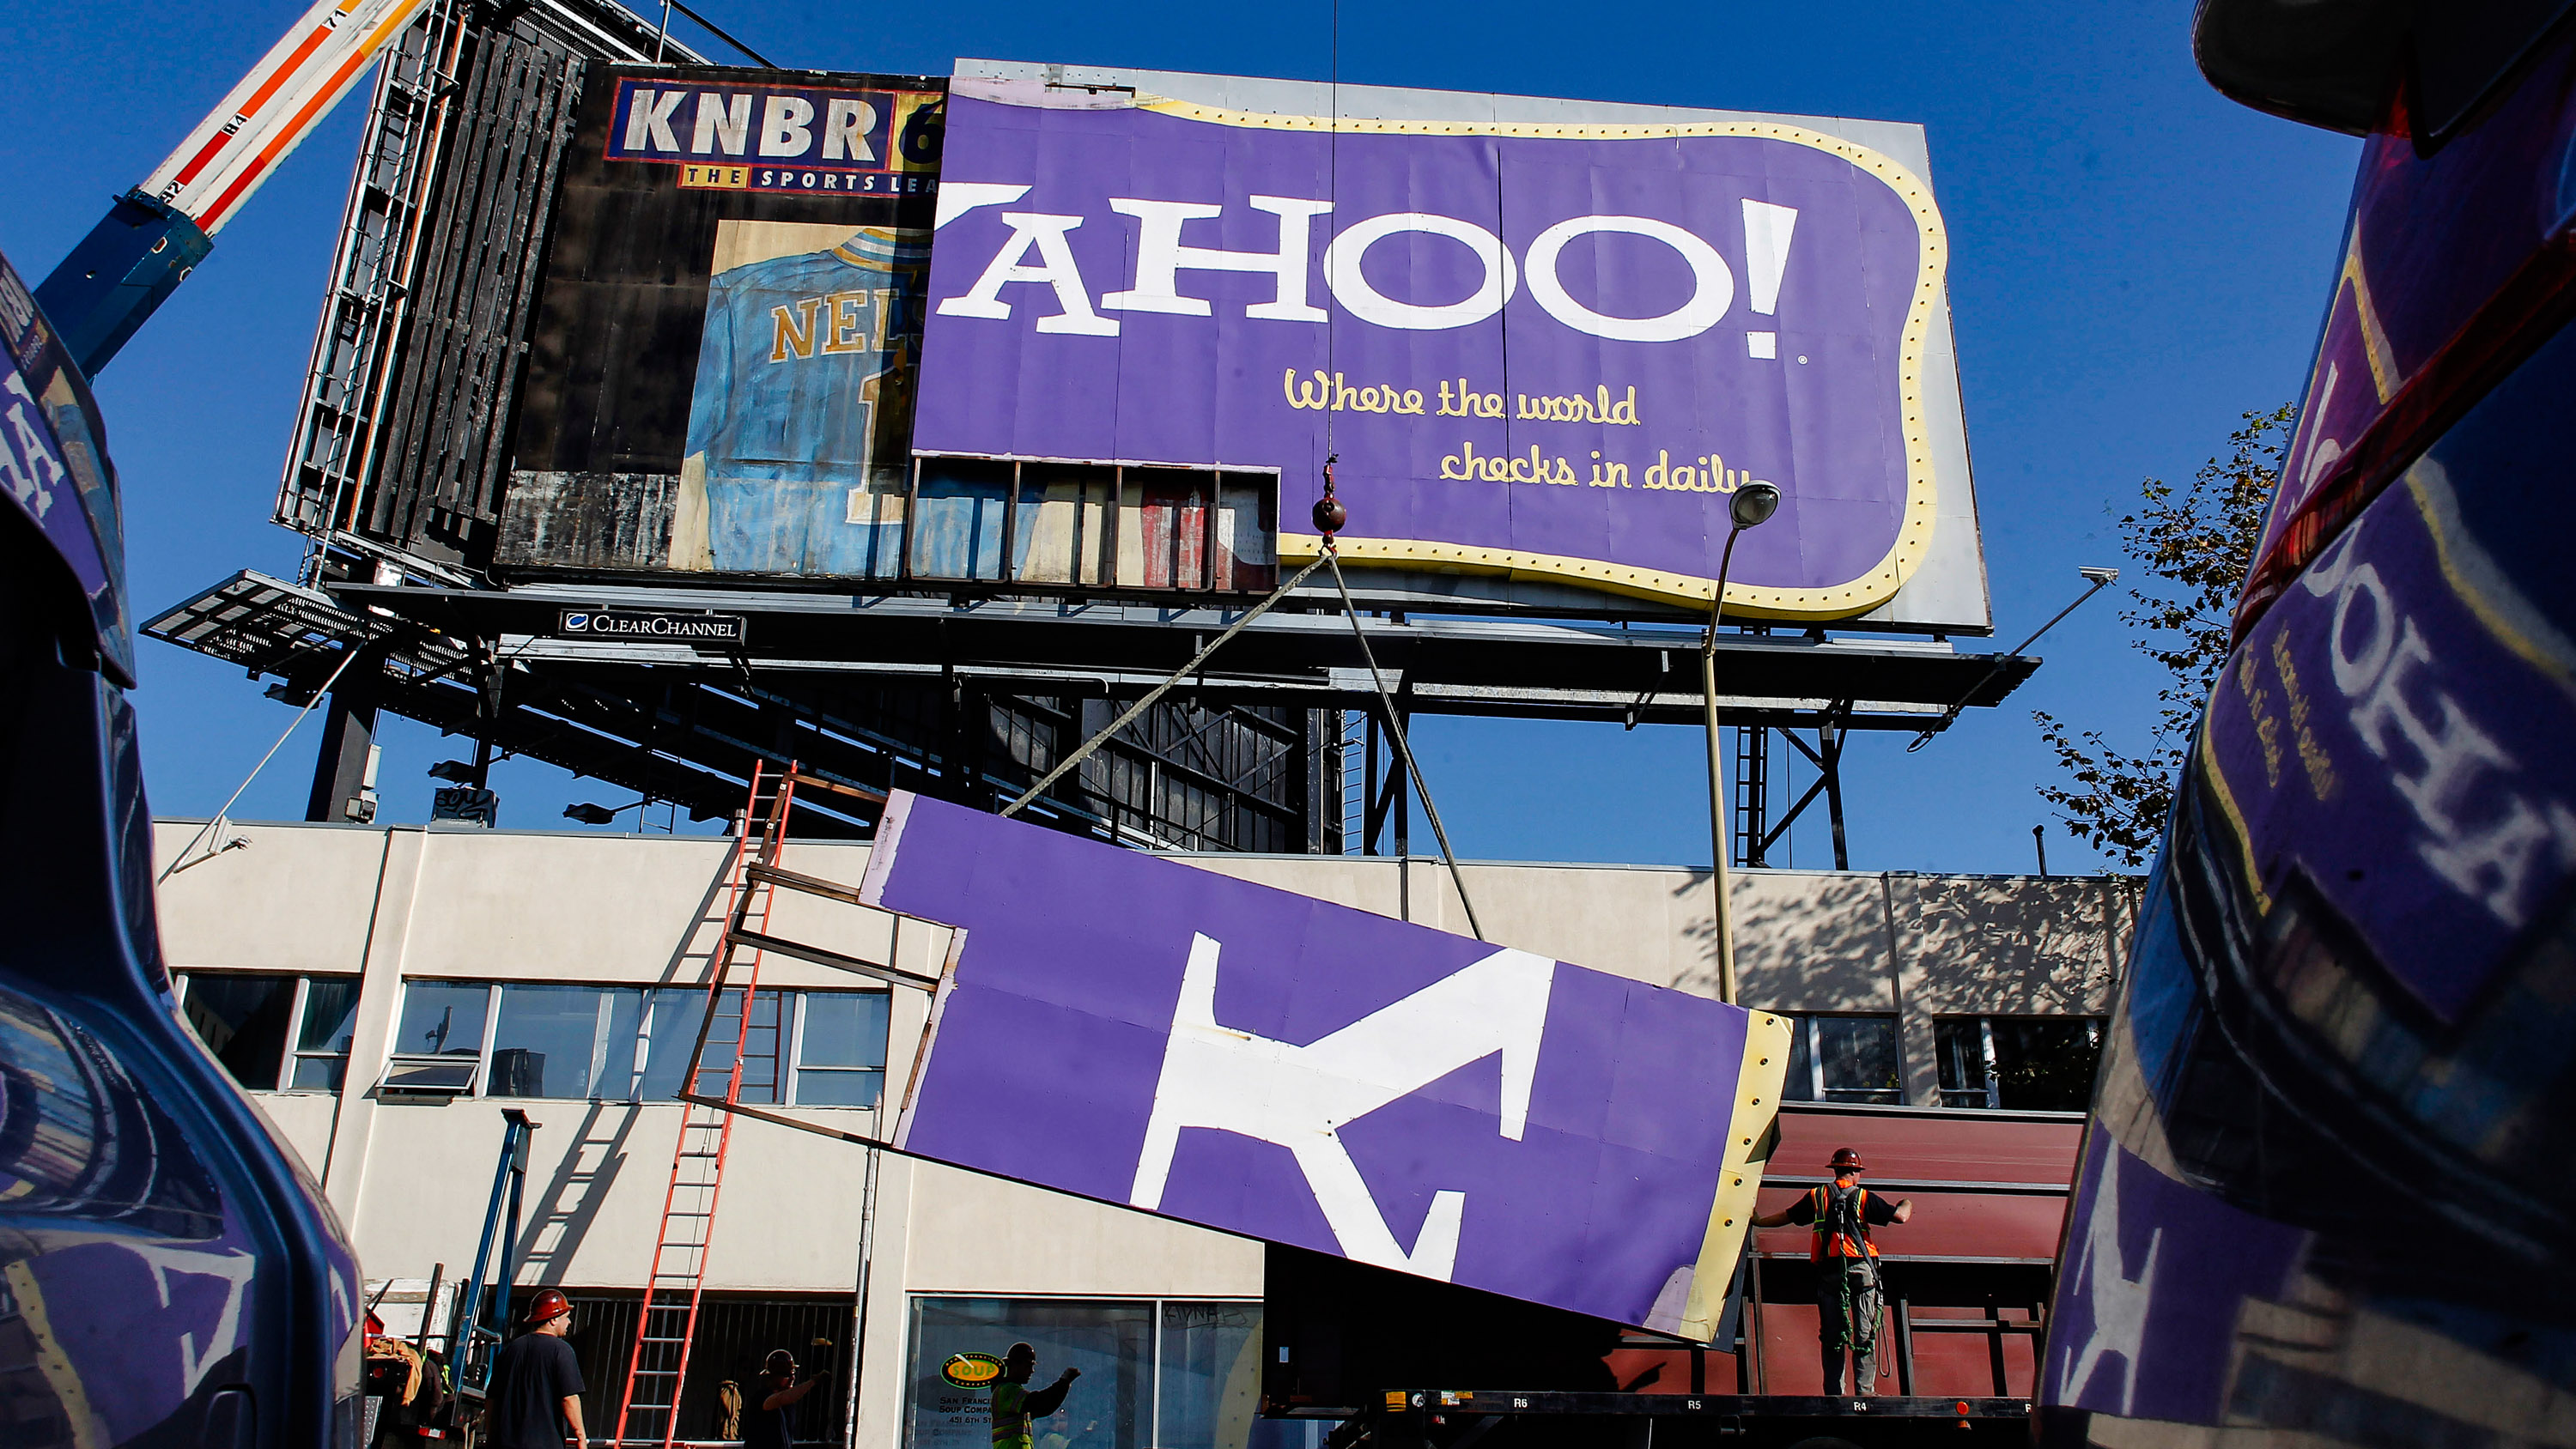 seen from between parked cars, workers with hard hats and ladders are taking down the Y of an old Yahoo! billboard